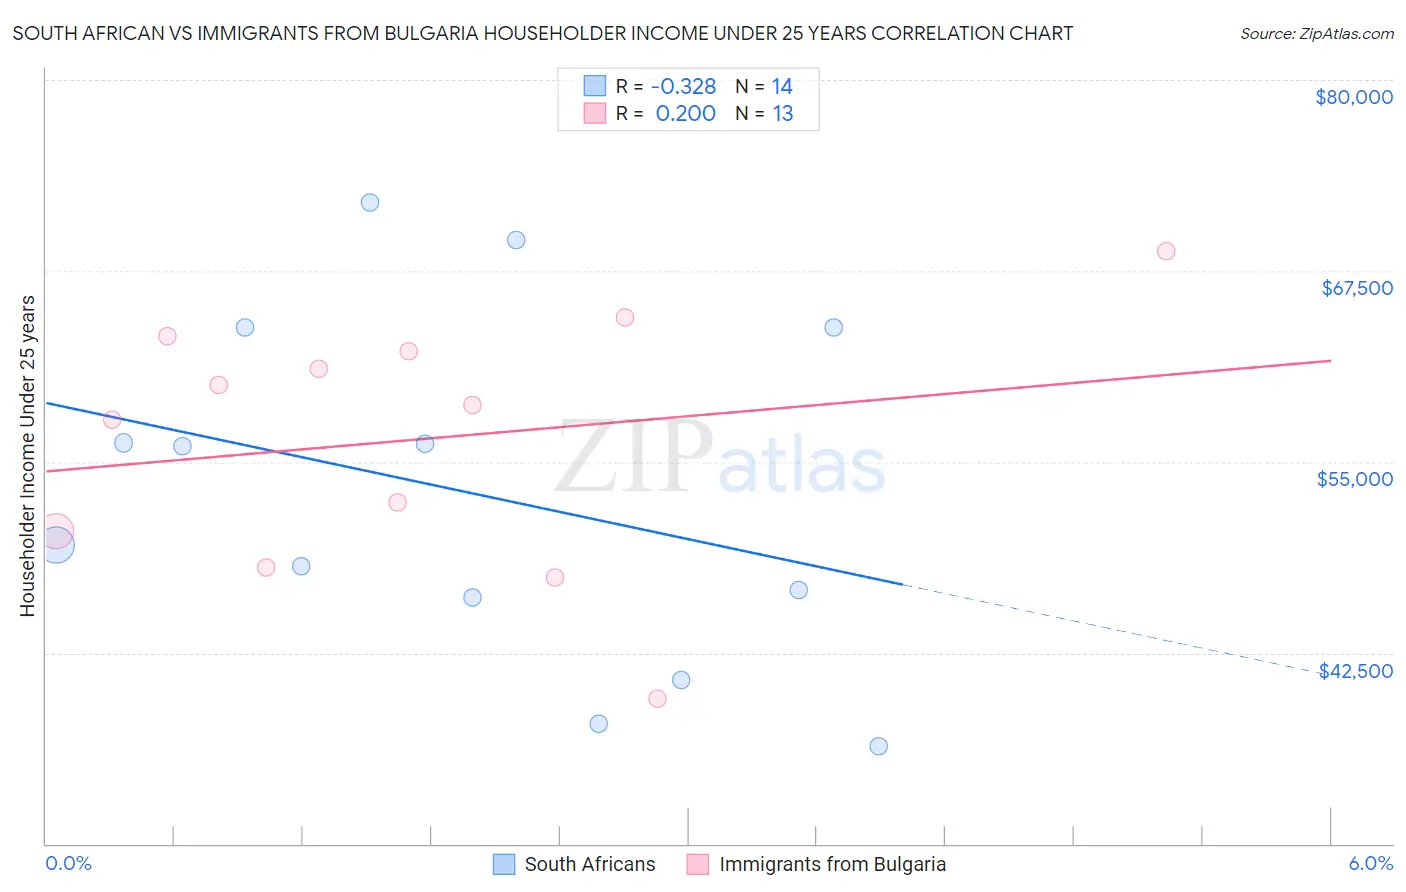 South African vs Immigrants from Bulgaria Householder Income Under 25 years